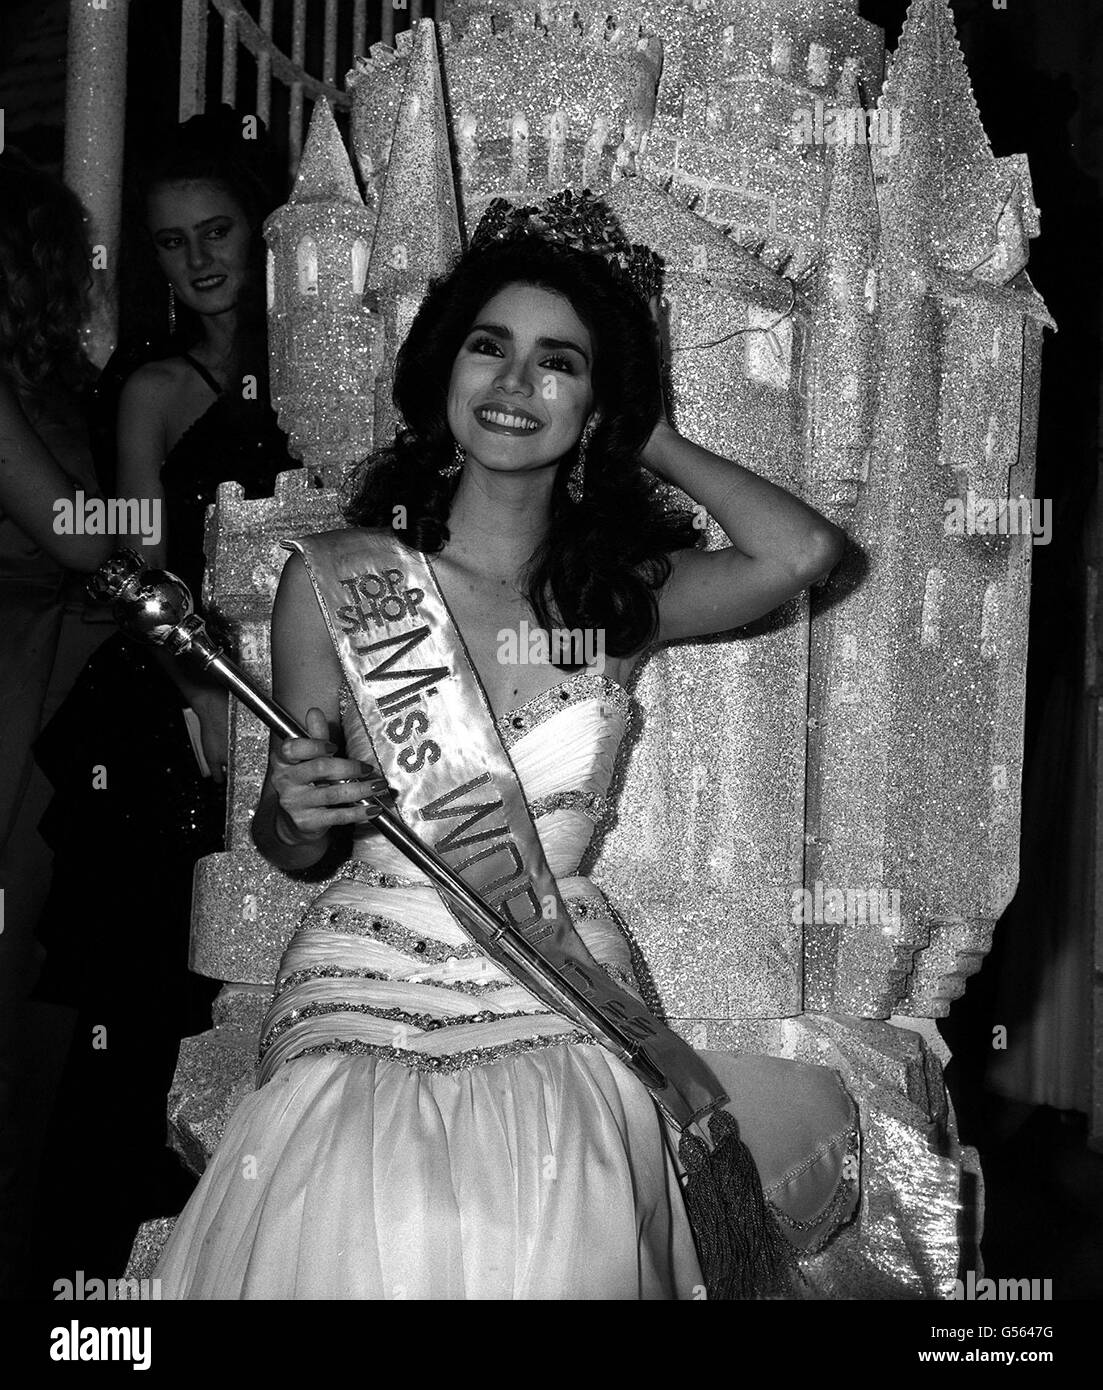 MISS WORLD 1984: 21 year old Psychology student Astrid Herrera, the reigning Miss Venezuela, after being crowned Miss World 1984 at the Royal Albert Hall in London. Miss Herrera, 36-24-37, wins a cash prize of 30,000. Stock Photo